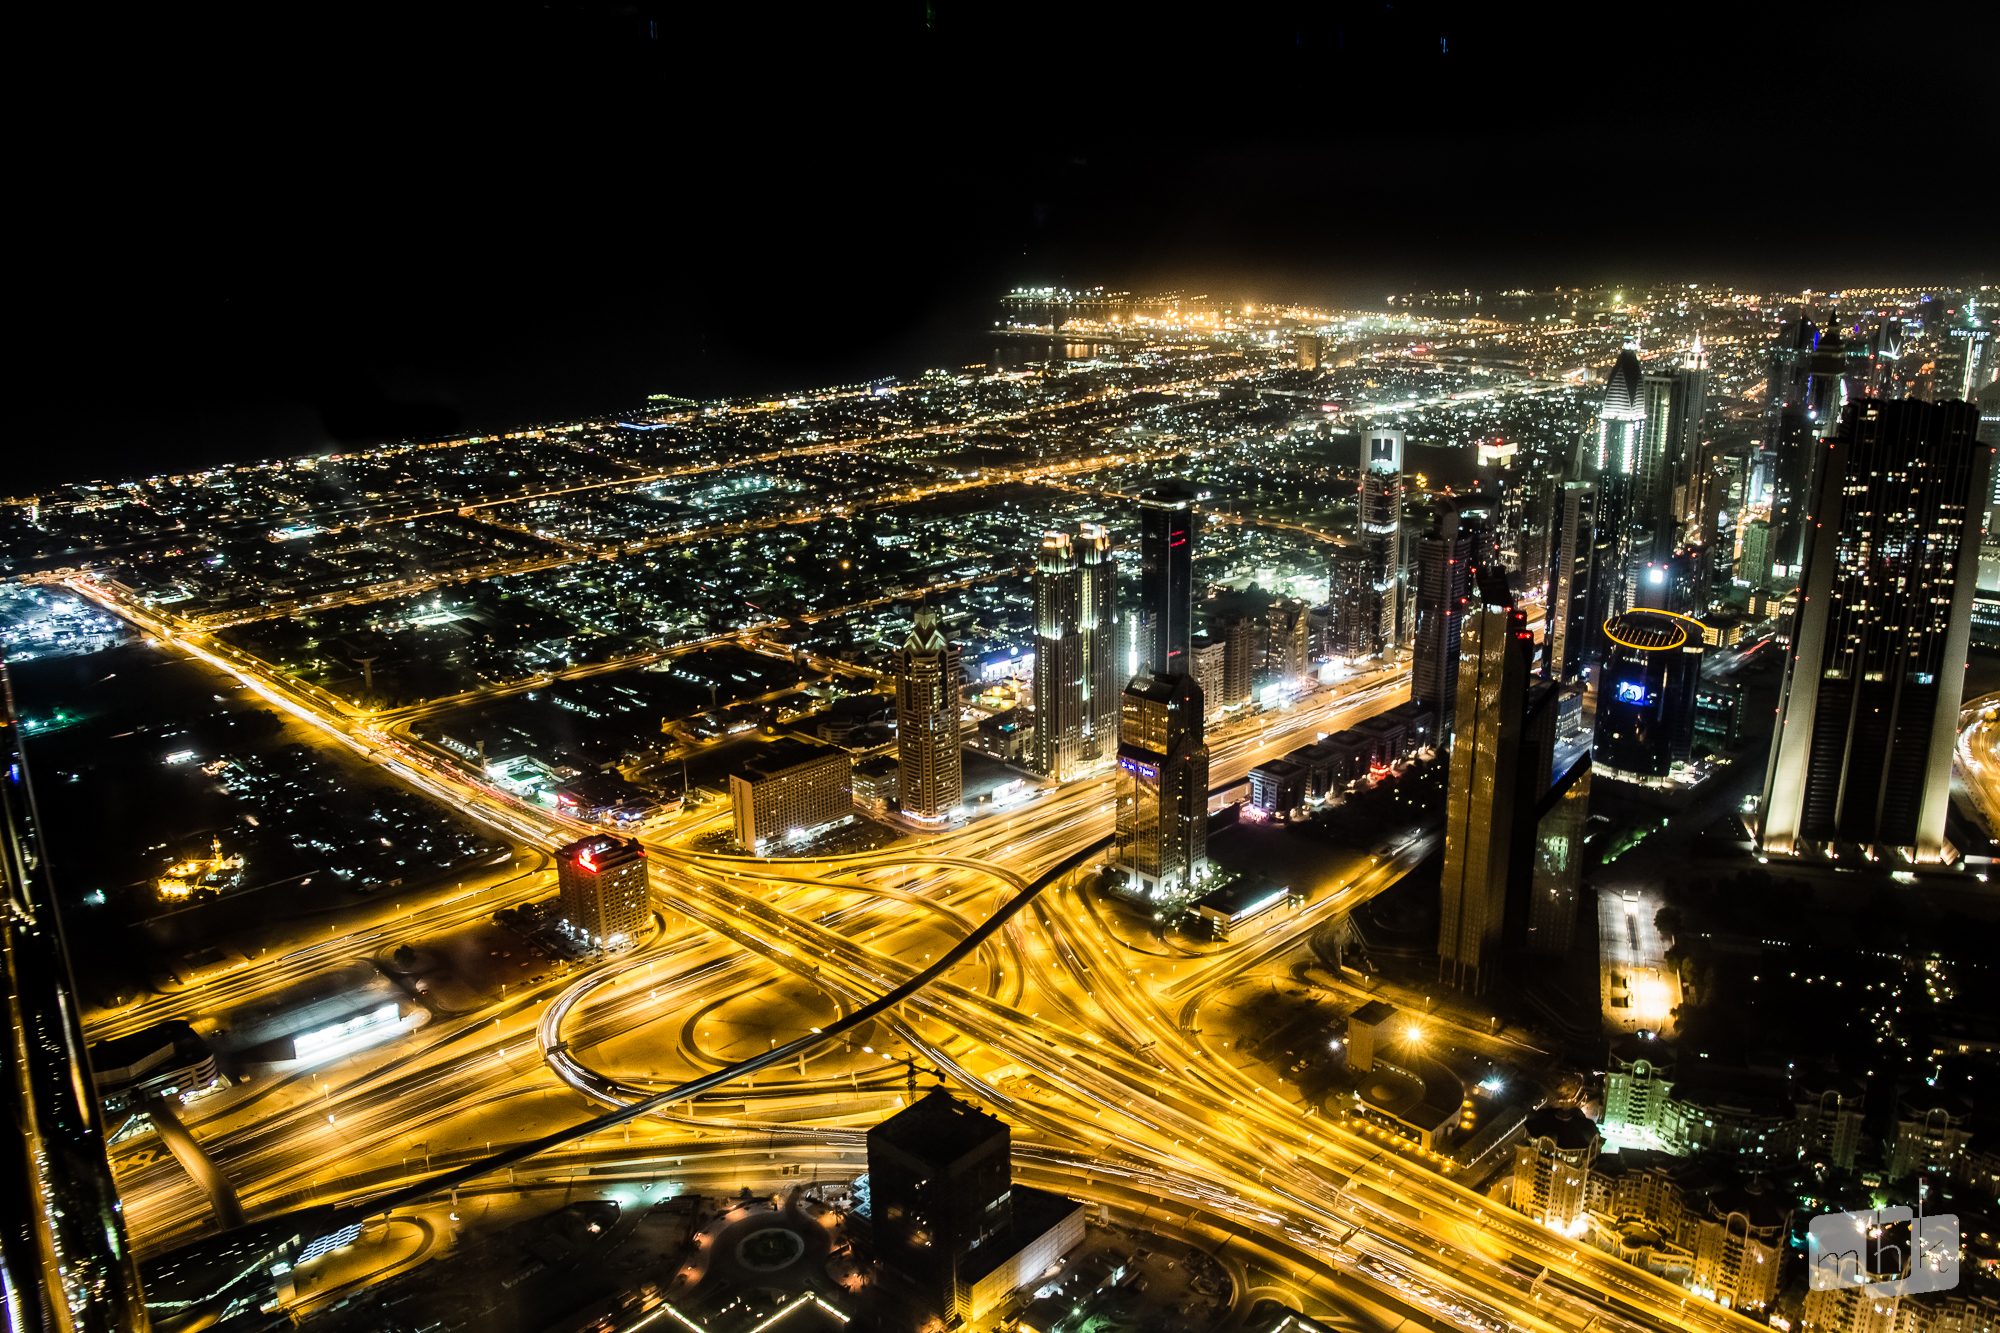 More than 100 cities will convene in Dubai for the WCCD Global Cities Summit where new thematic reports on mobility, infrastructure and investment will be released